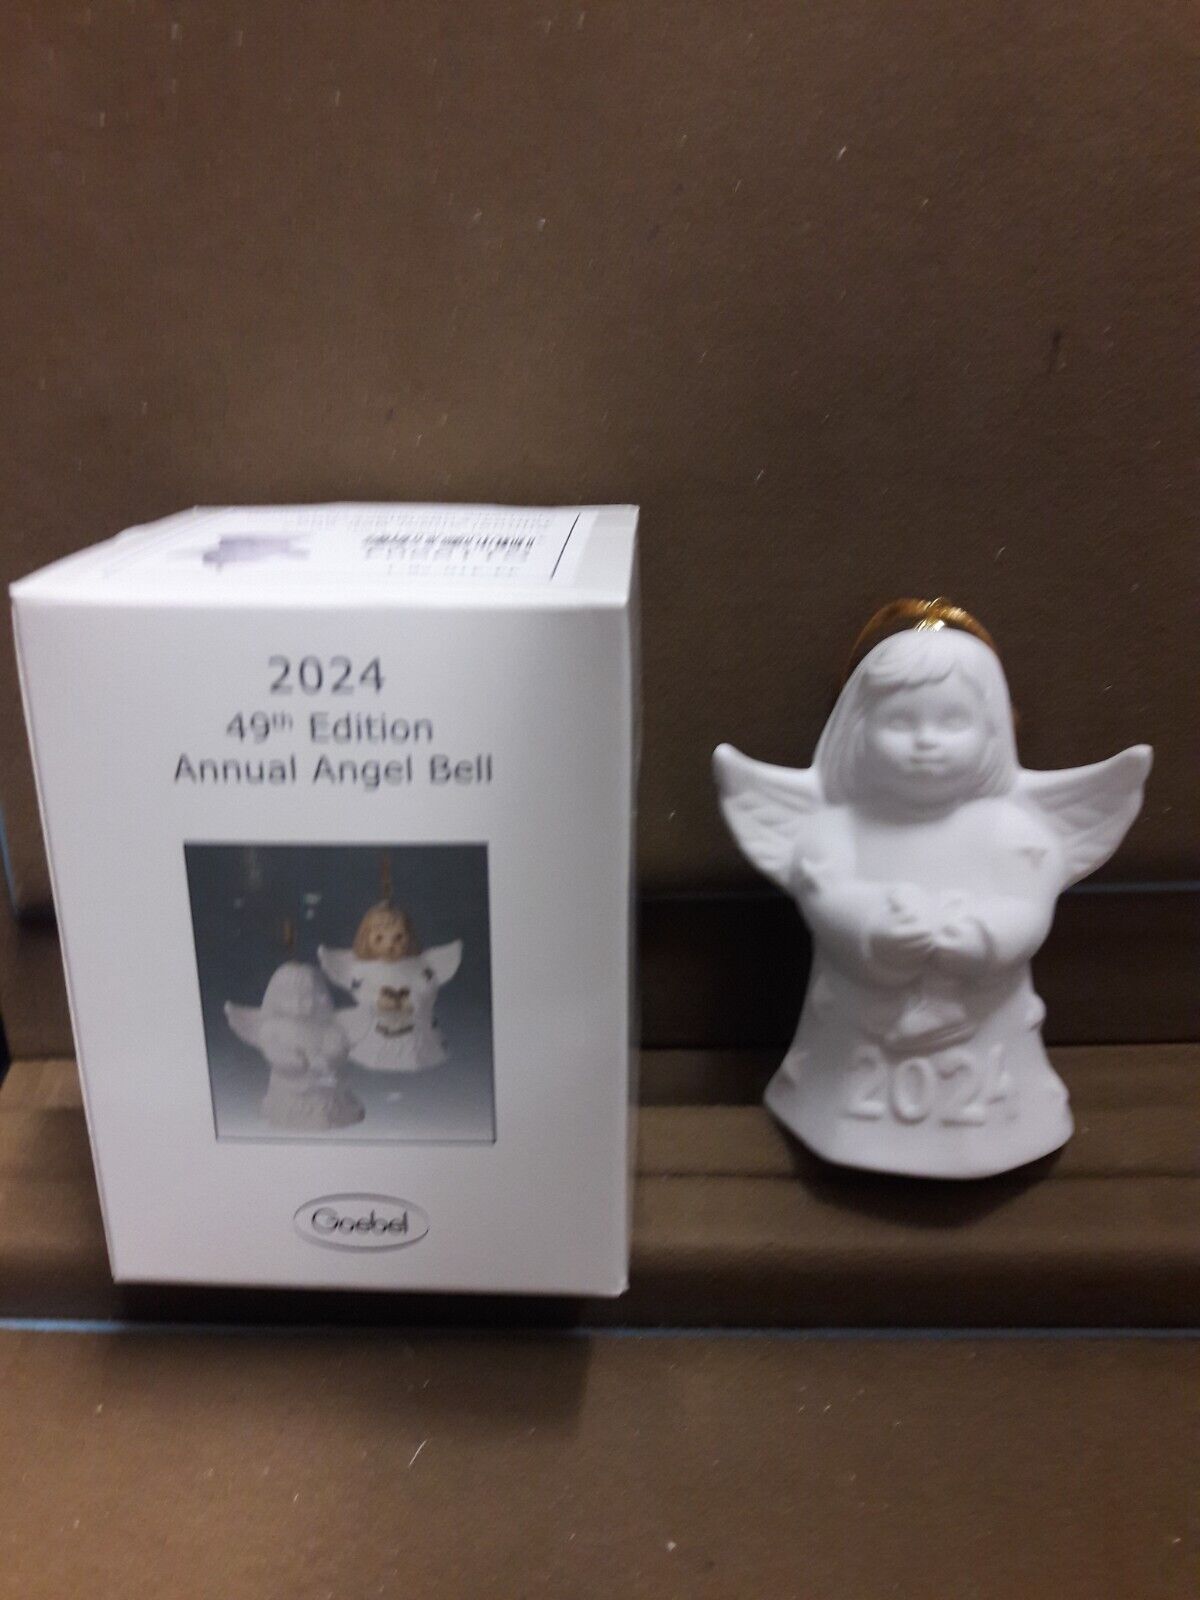 GOEBEL,  2024 ANNUAL ANGEL BELL, 49TH EDITION, COLOR- WHITE BISQUE, NEW, MIB